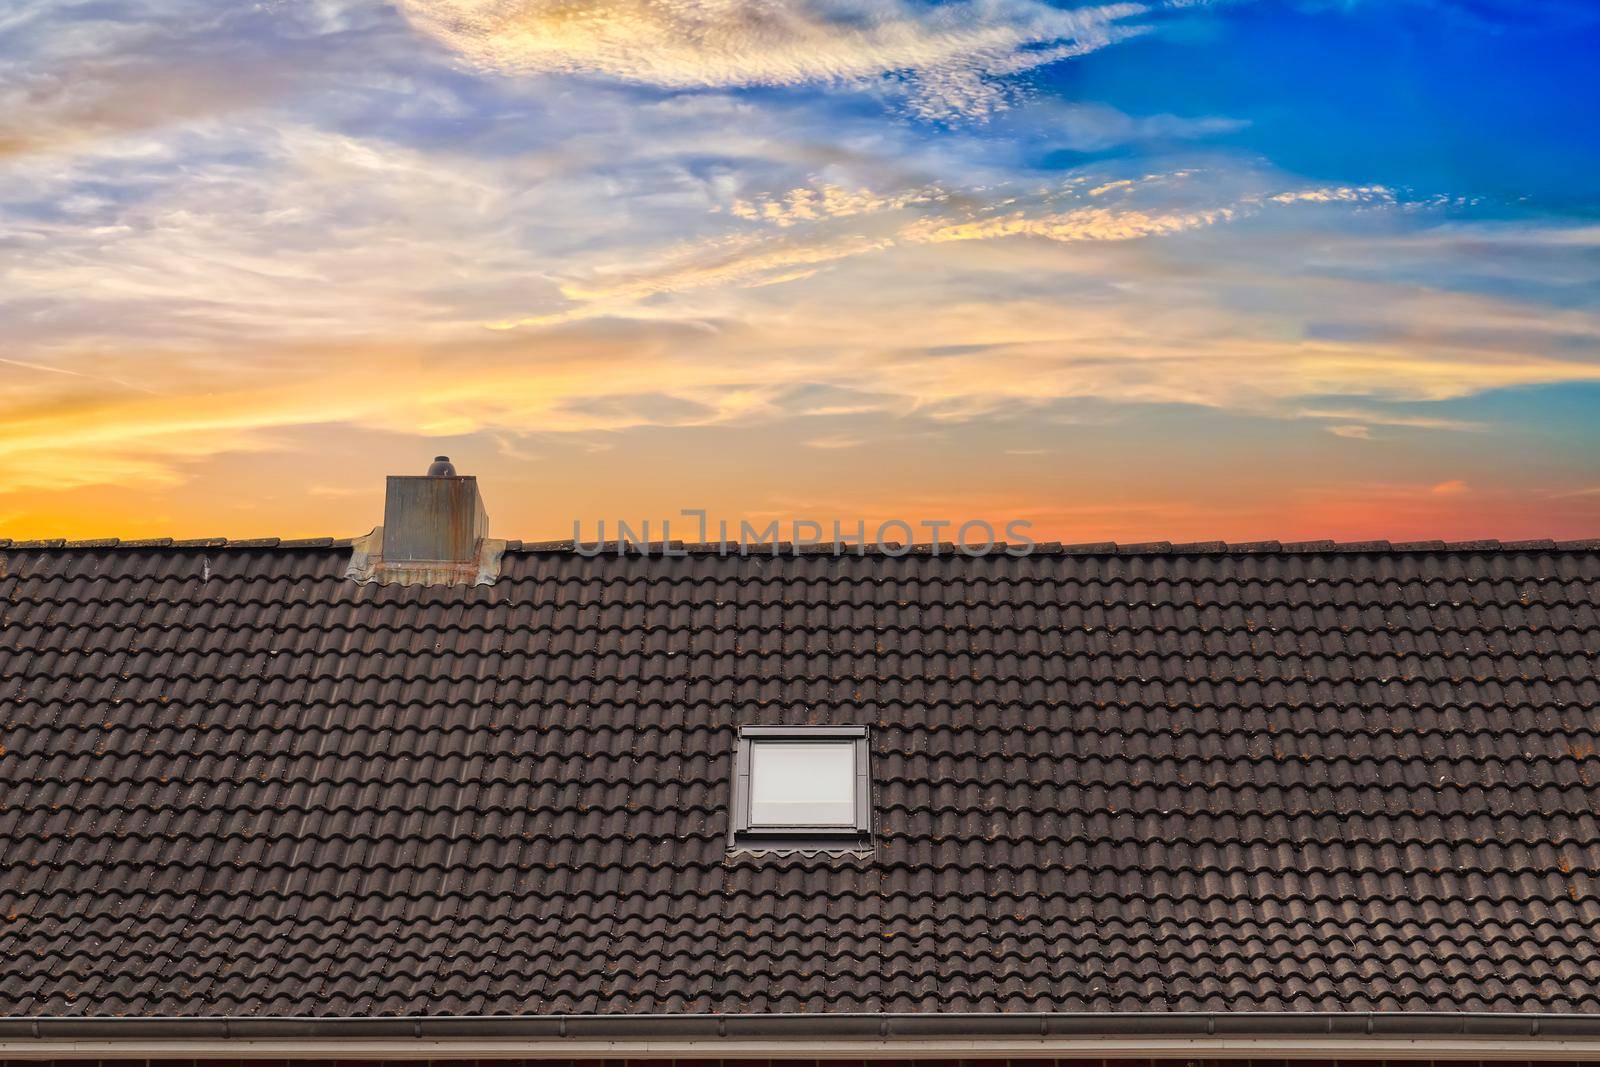 Roof window in velux style with dark roof tiles. by MP_foto71